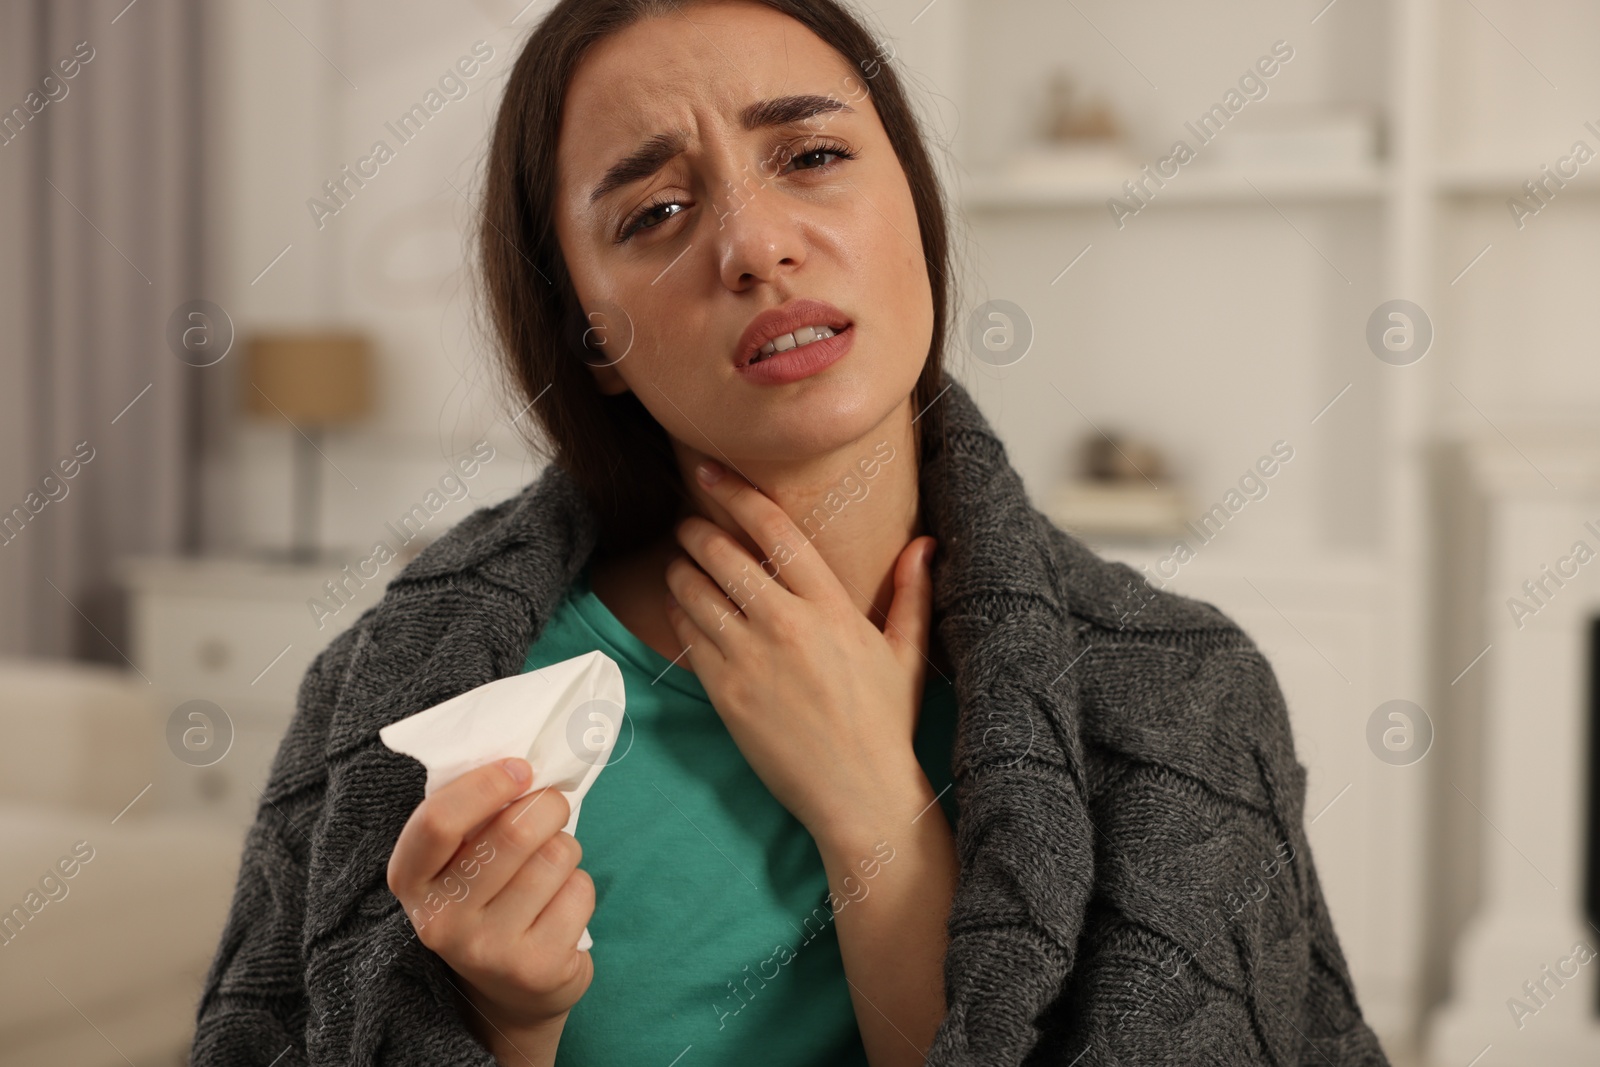 Photo of Sick woman wrapped in blanket with tissue at home. Cold symptoms